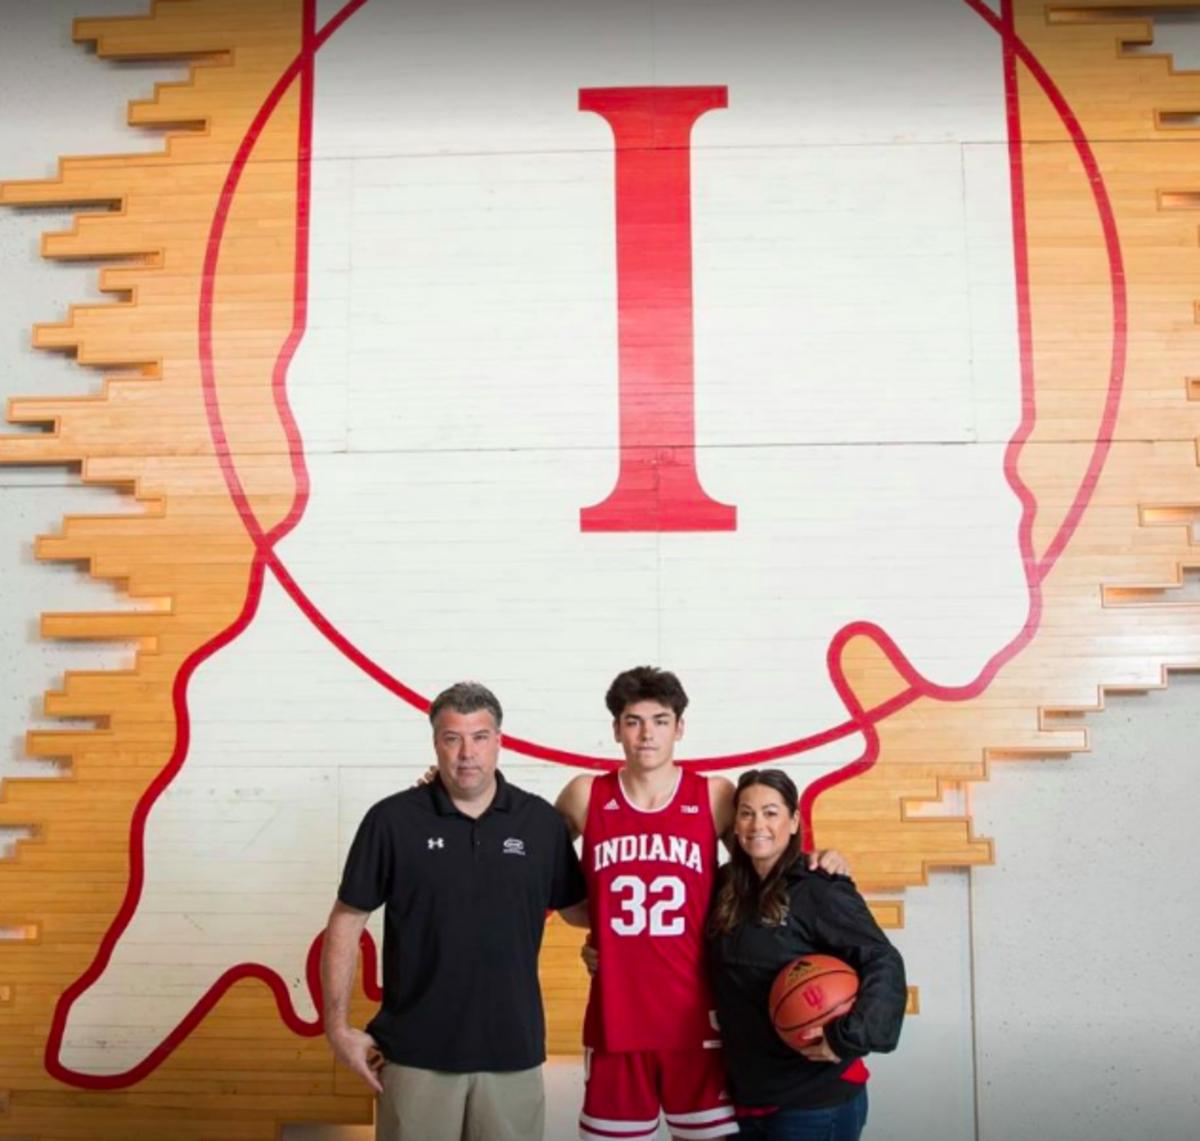 The Galloways during Trey's official visit to Indiana.